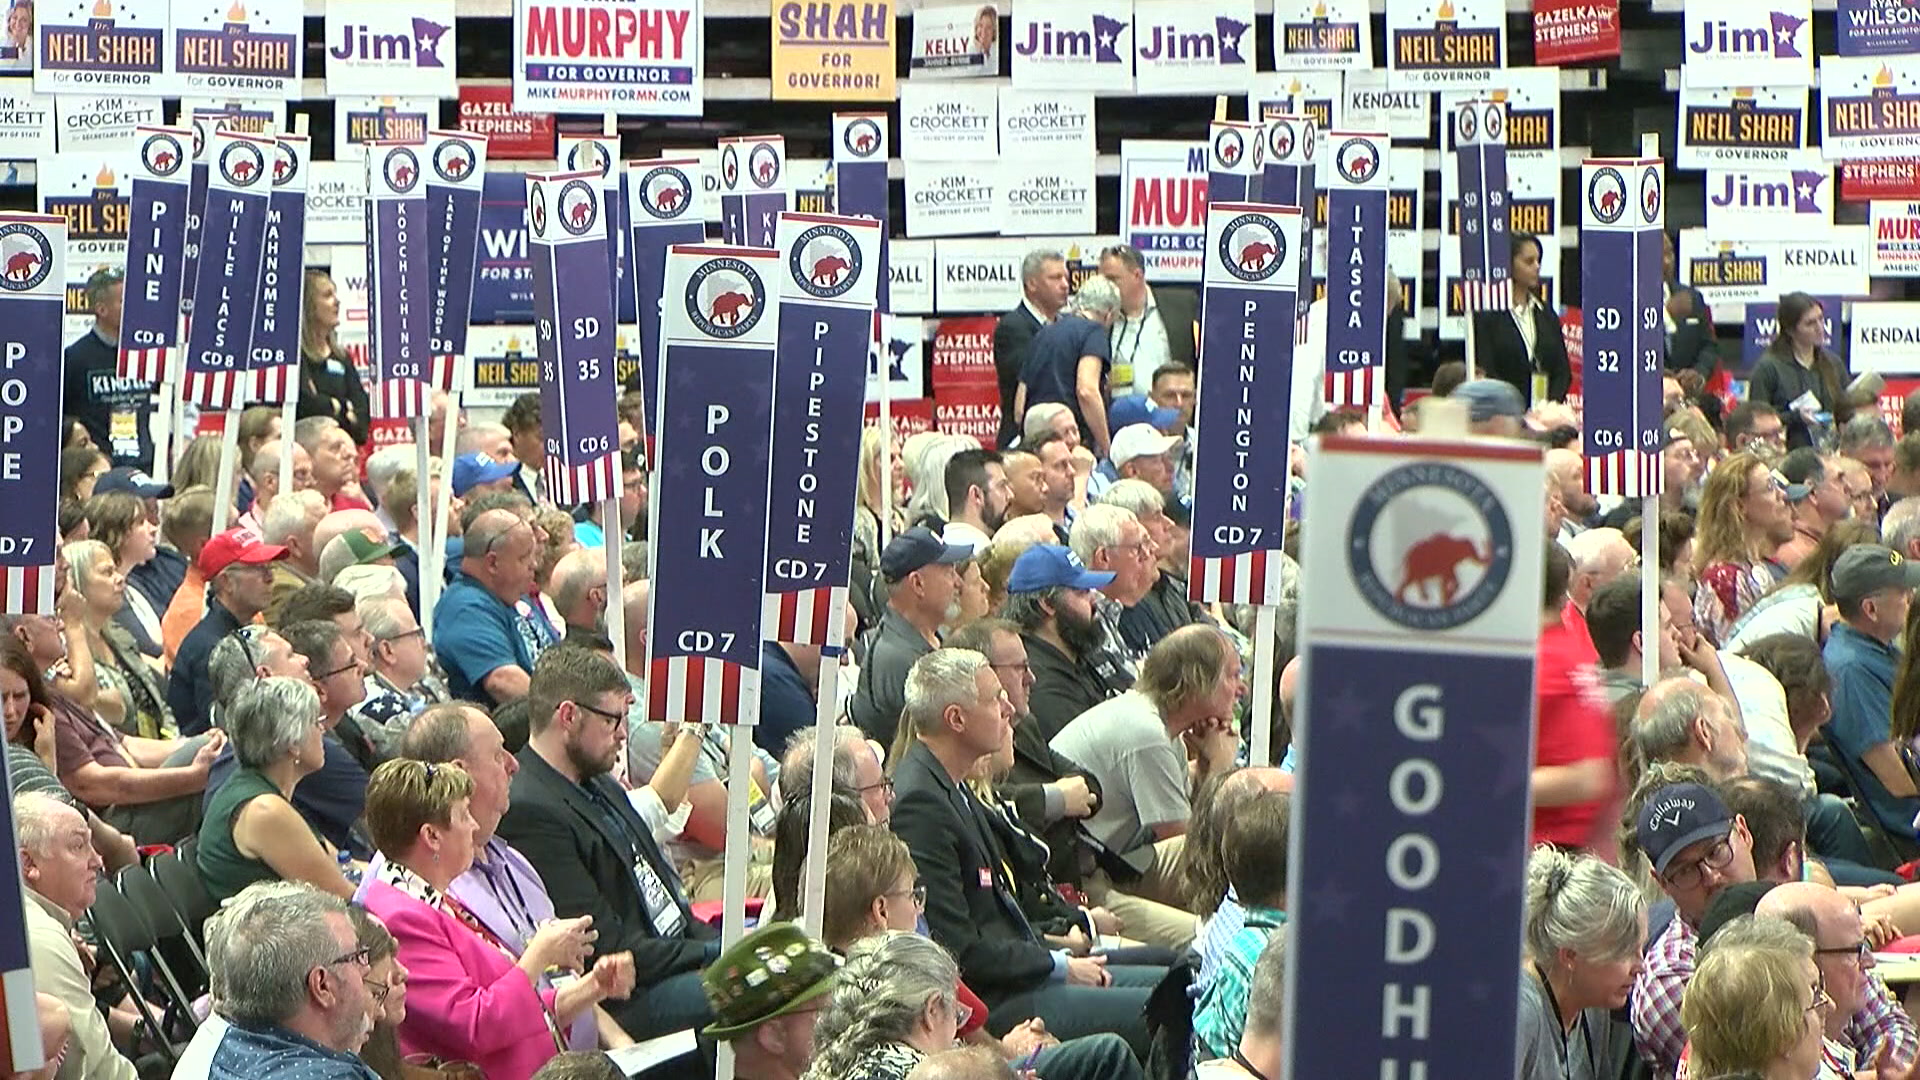 Minnesota Republicans Gather In Rochester For Convention To Nominate Candidates For Statewide Office – WCCO